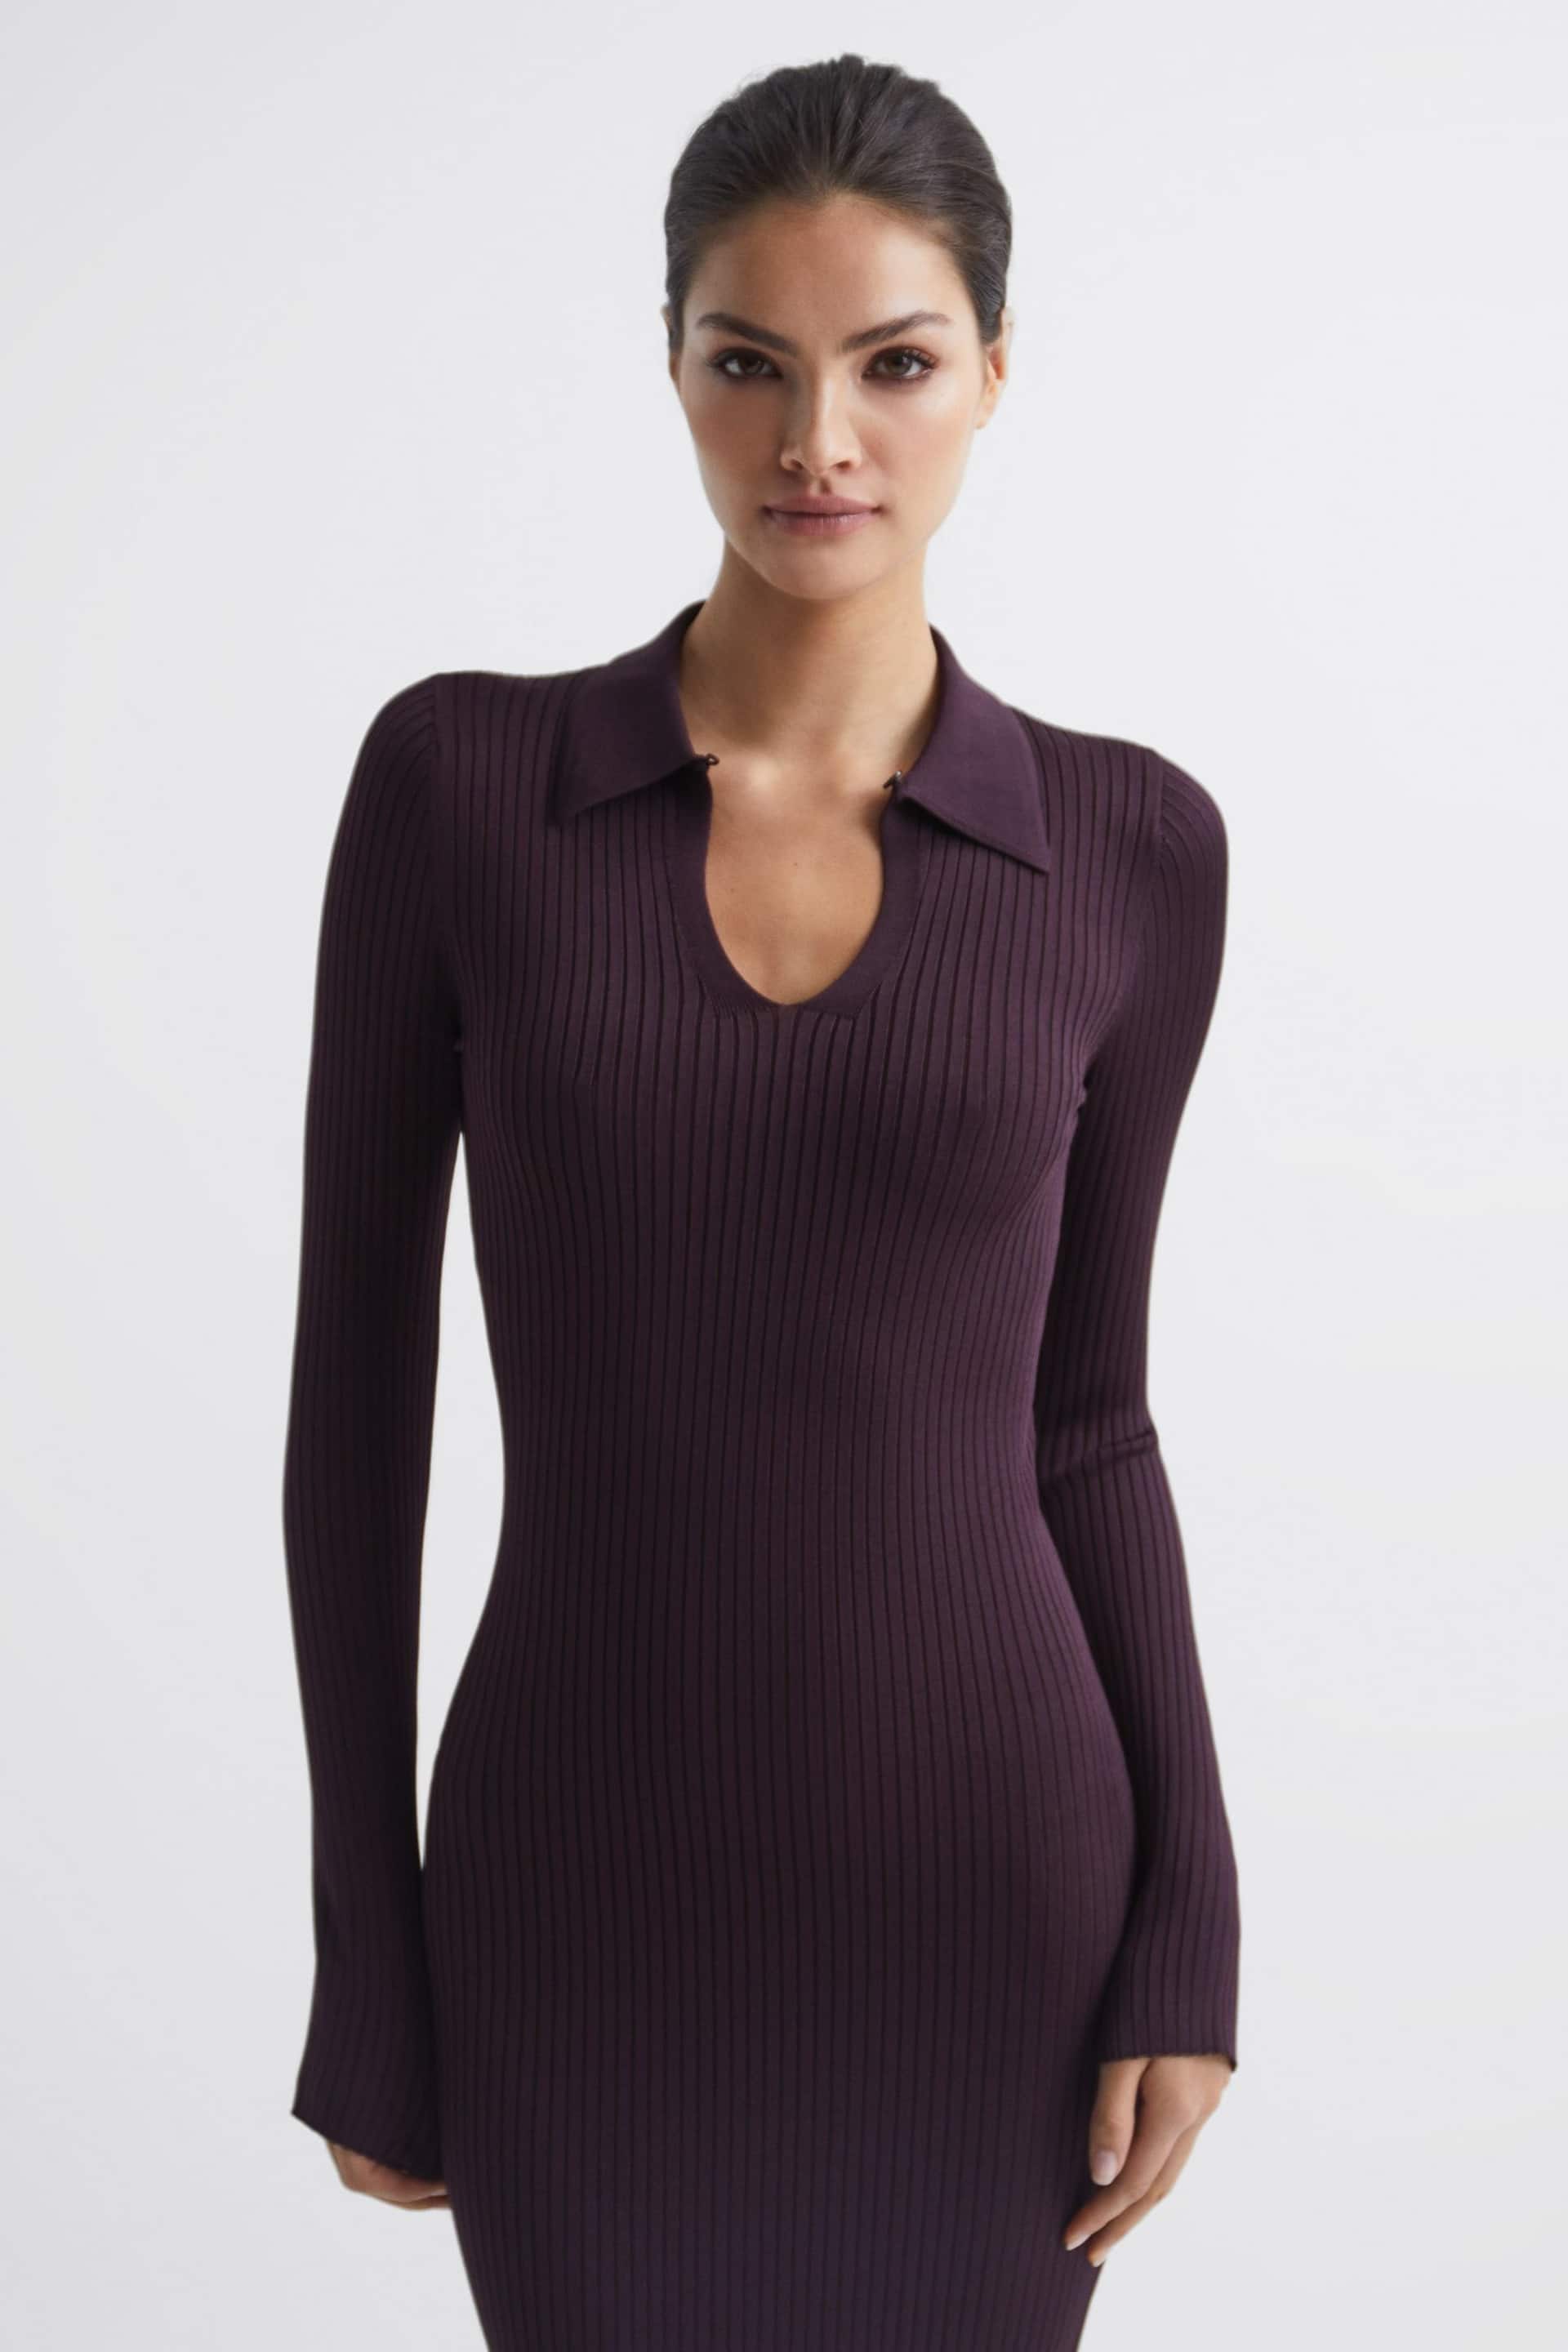 Reiss Purple Ronnie Collared Knitted Bodycon Dress - Image 6 of 7